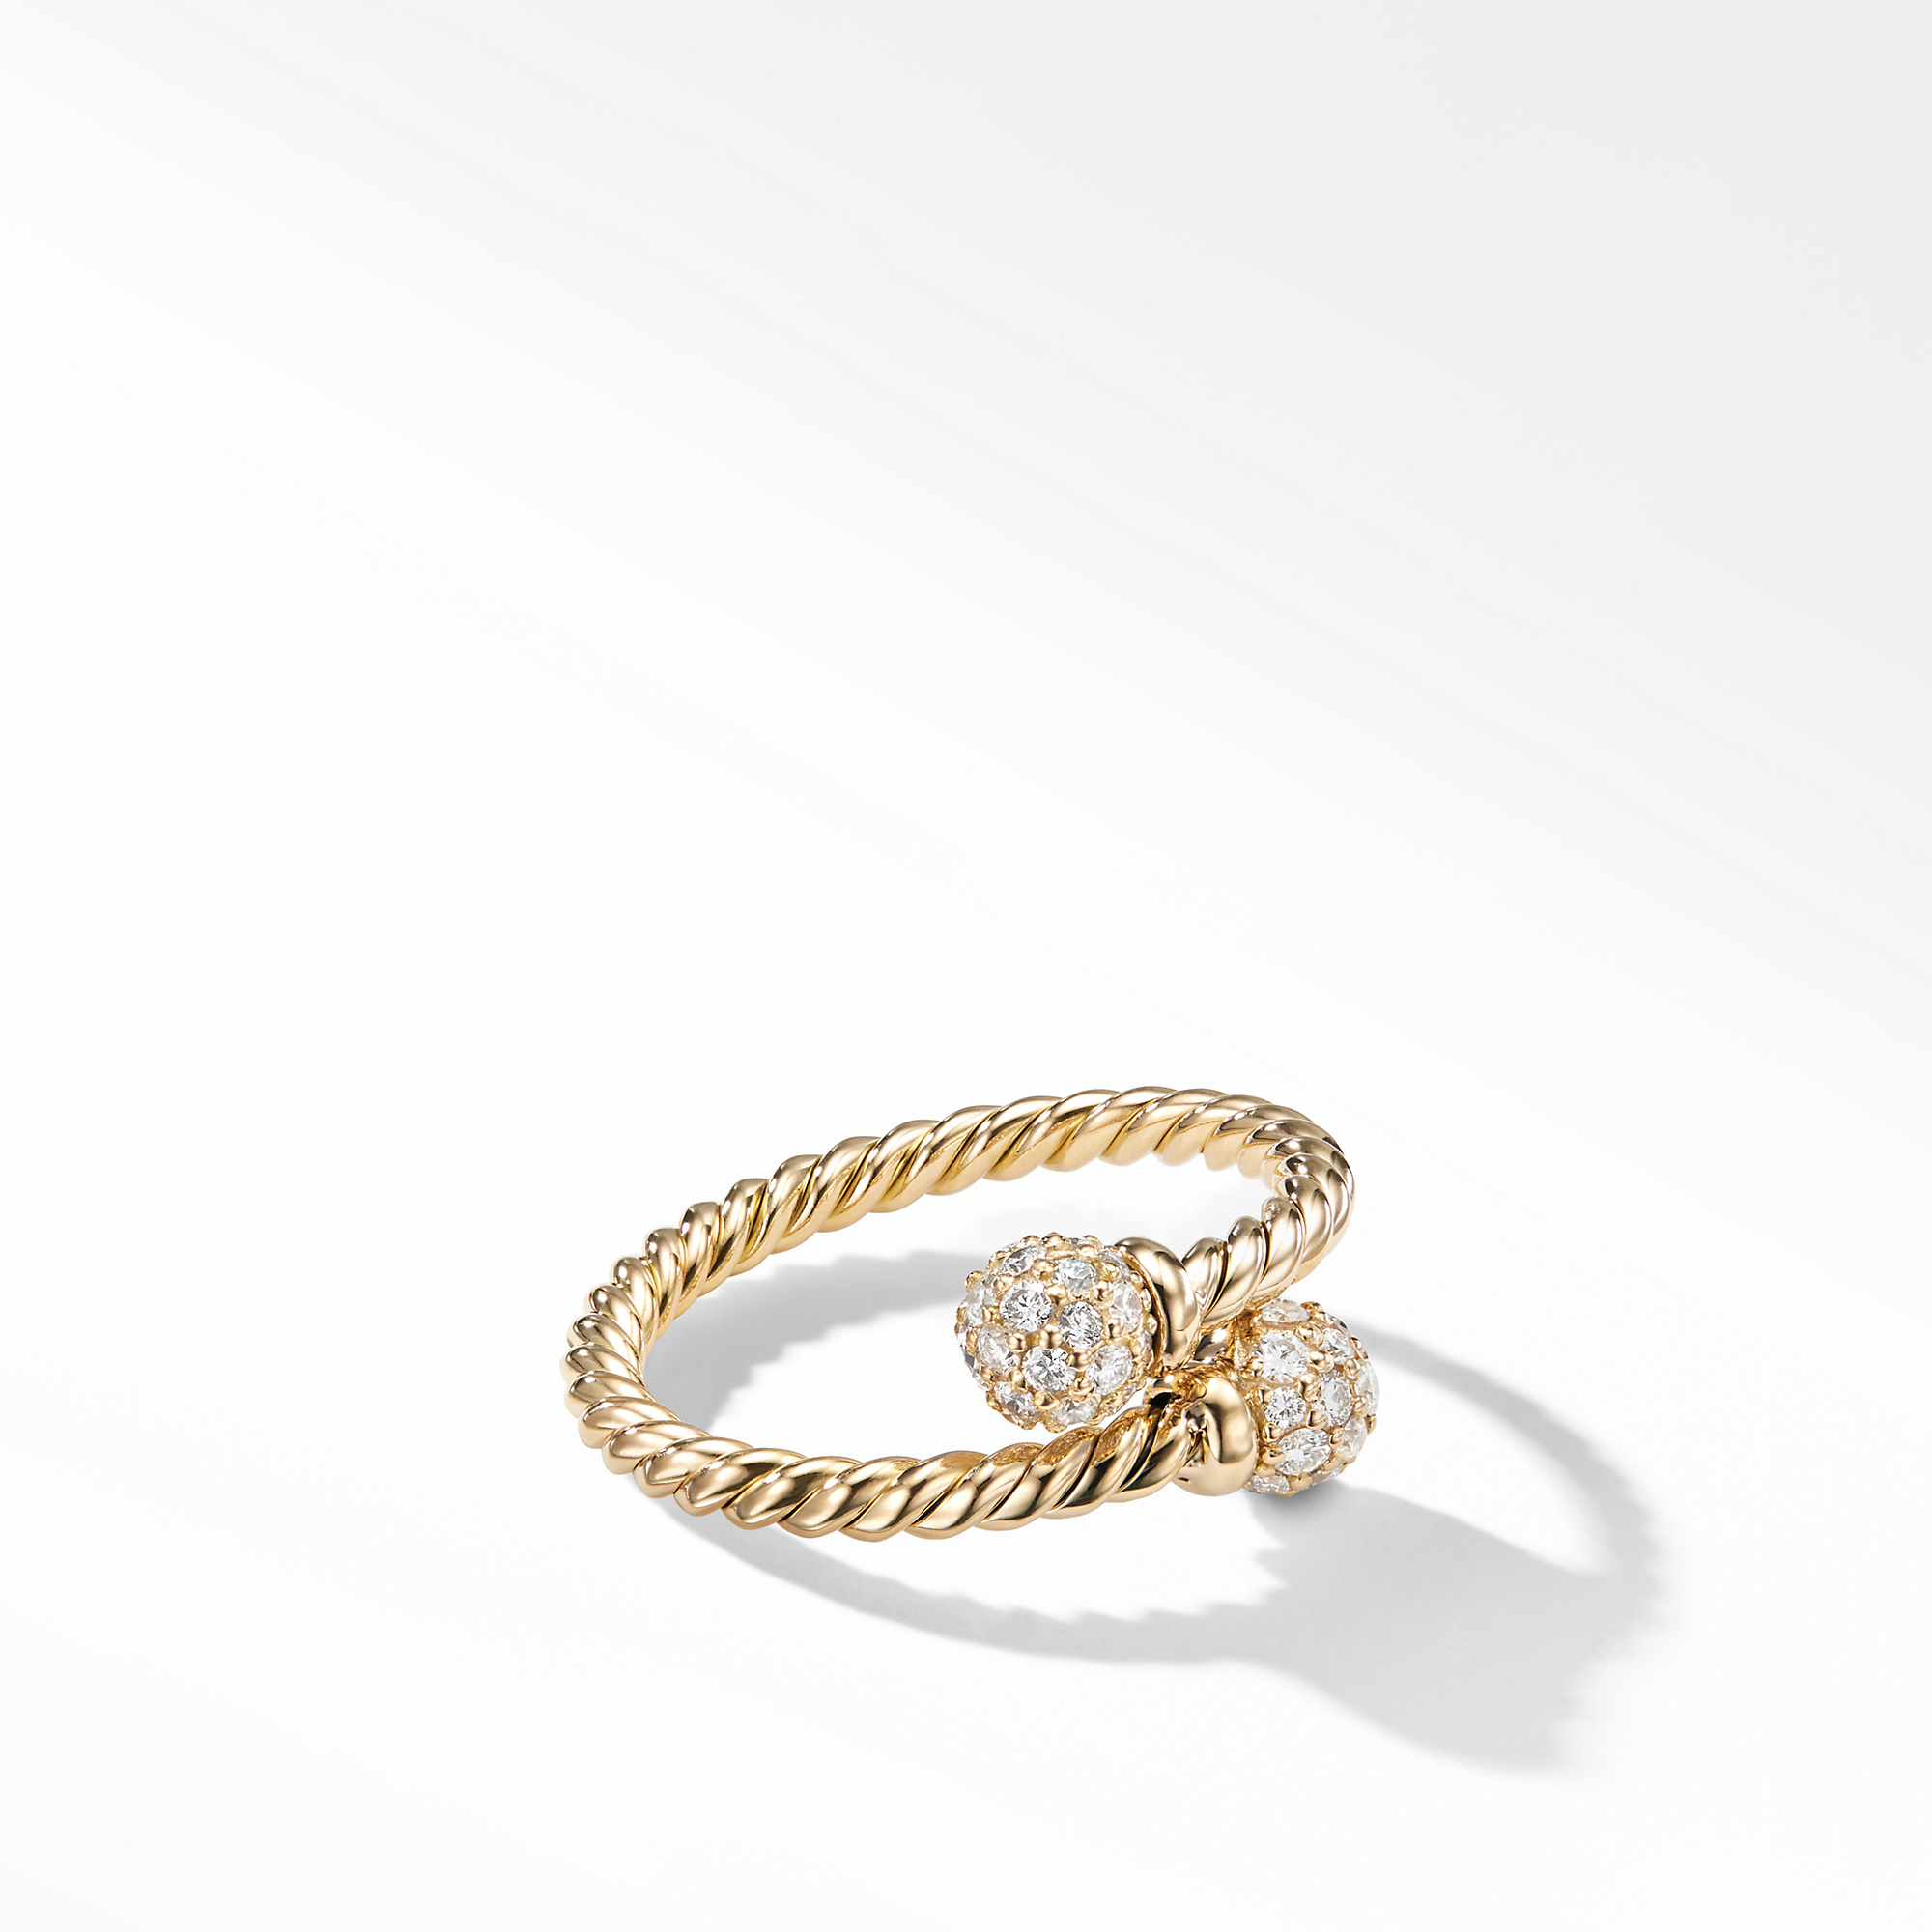 Petite Solari Bypass Ring in 18K Yellow Gold with Pave Diamonds